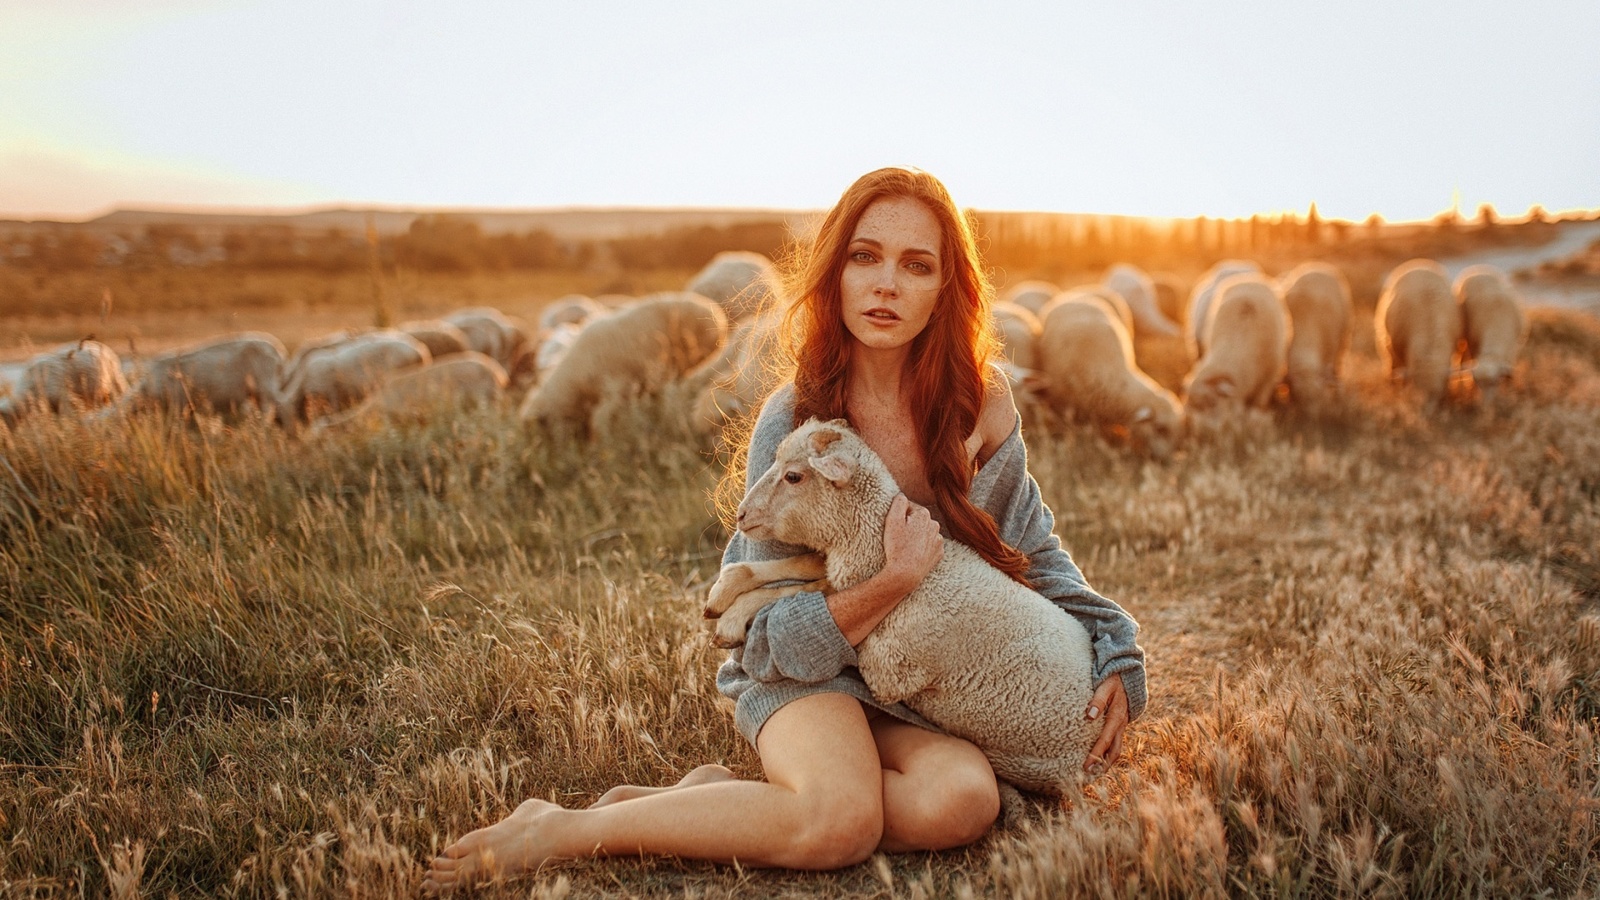 Girl with Sheep wallpaper 1600x900